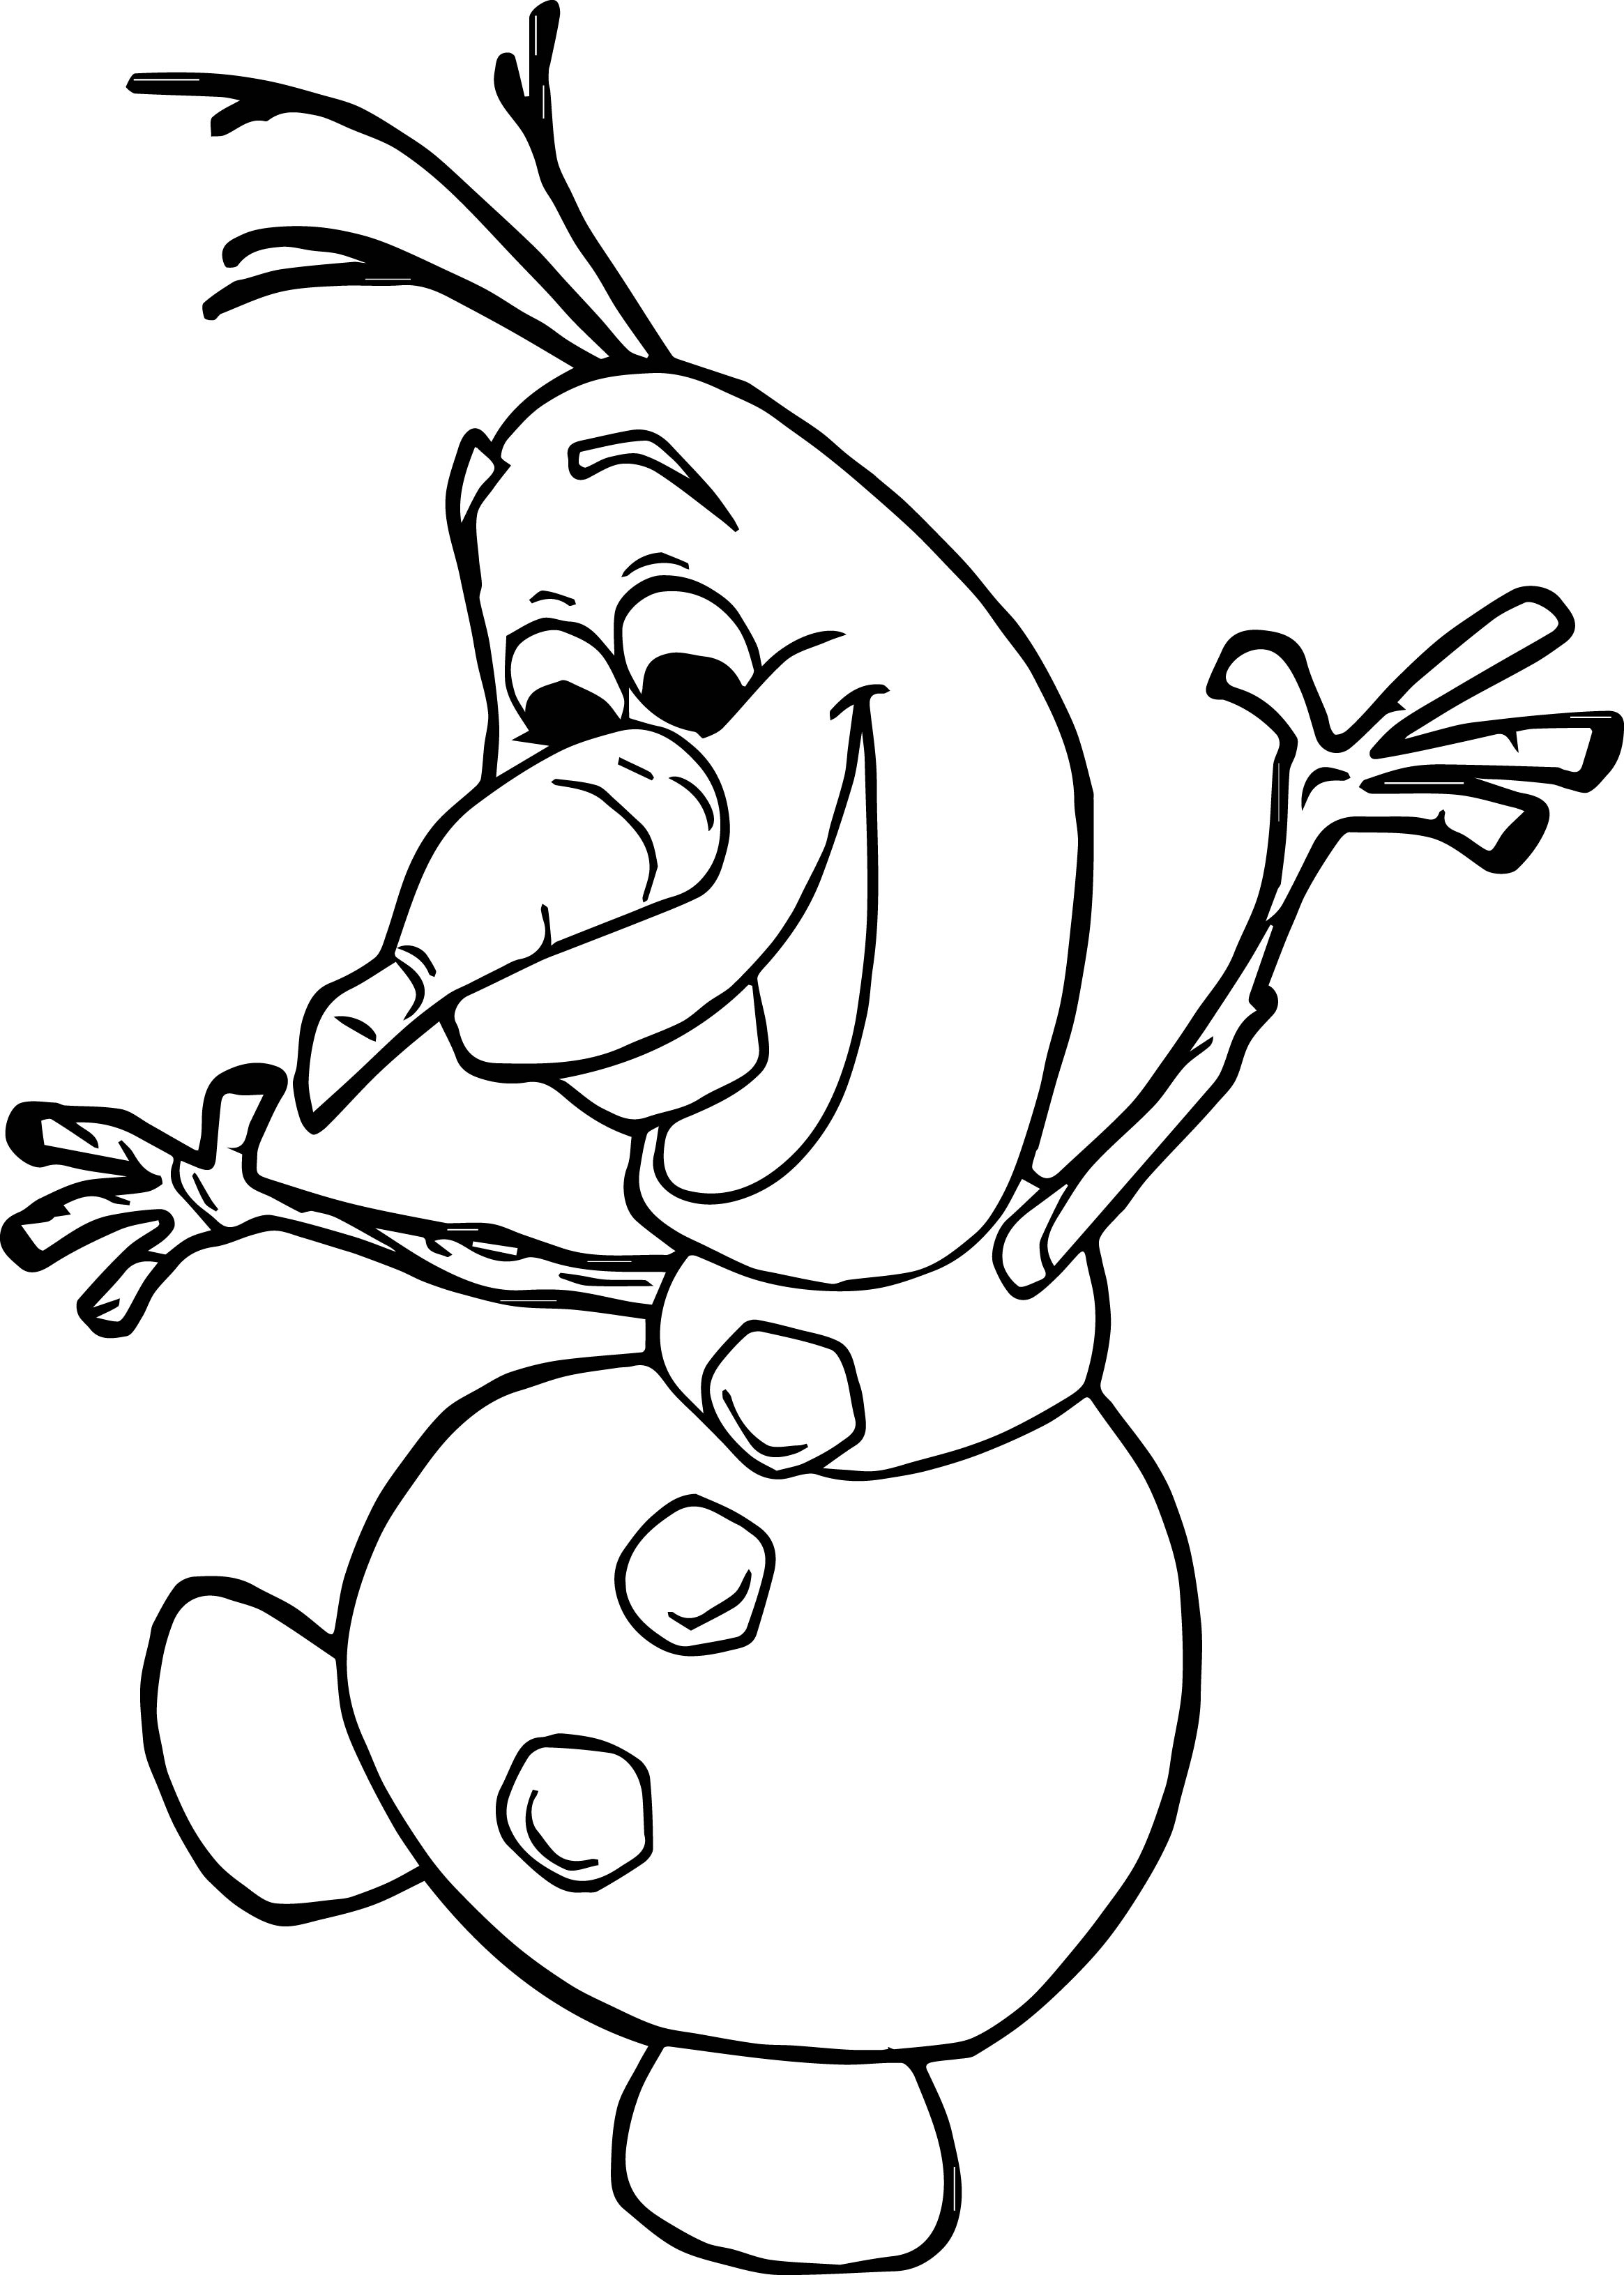 downloads-frozen-coloring-pages-images